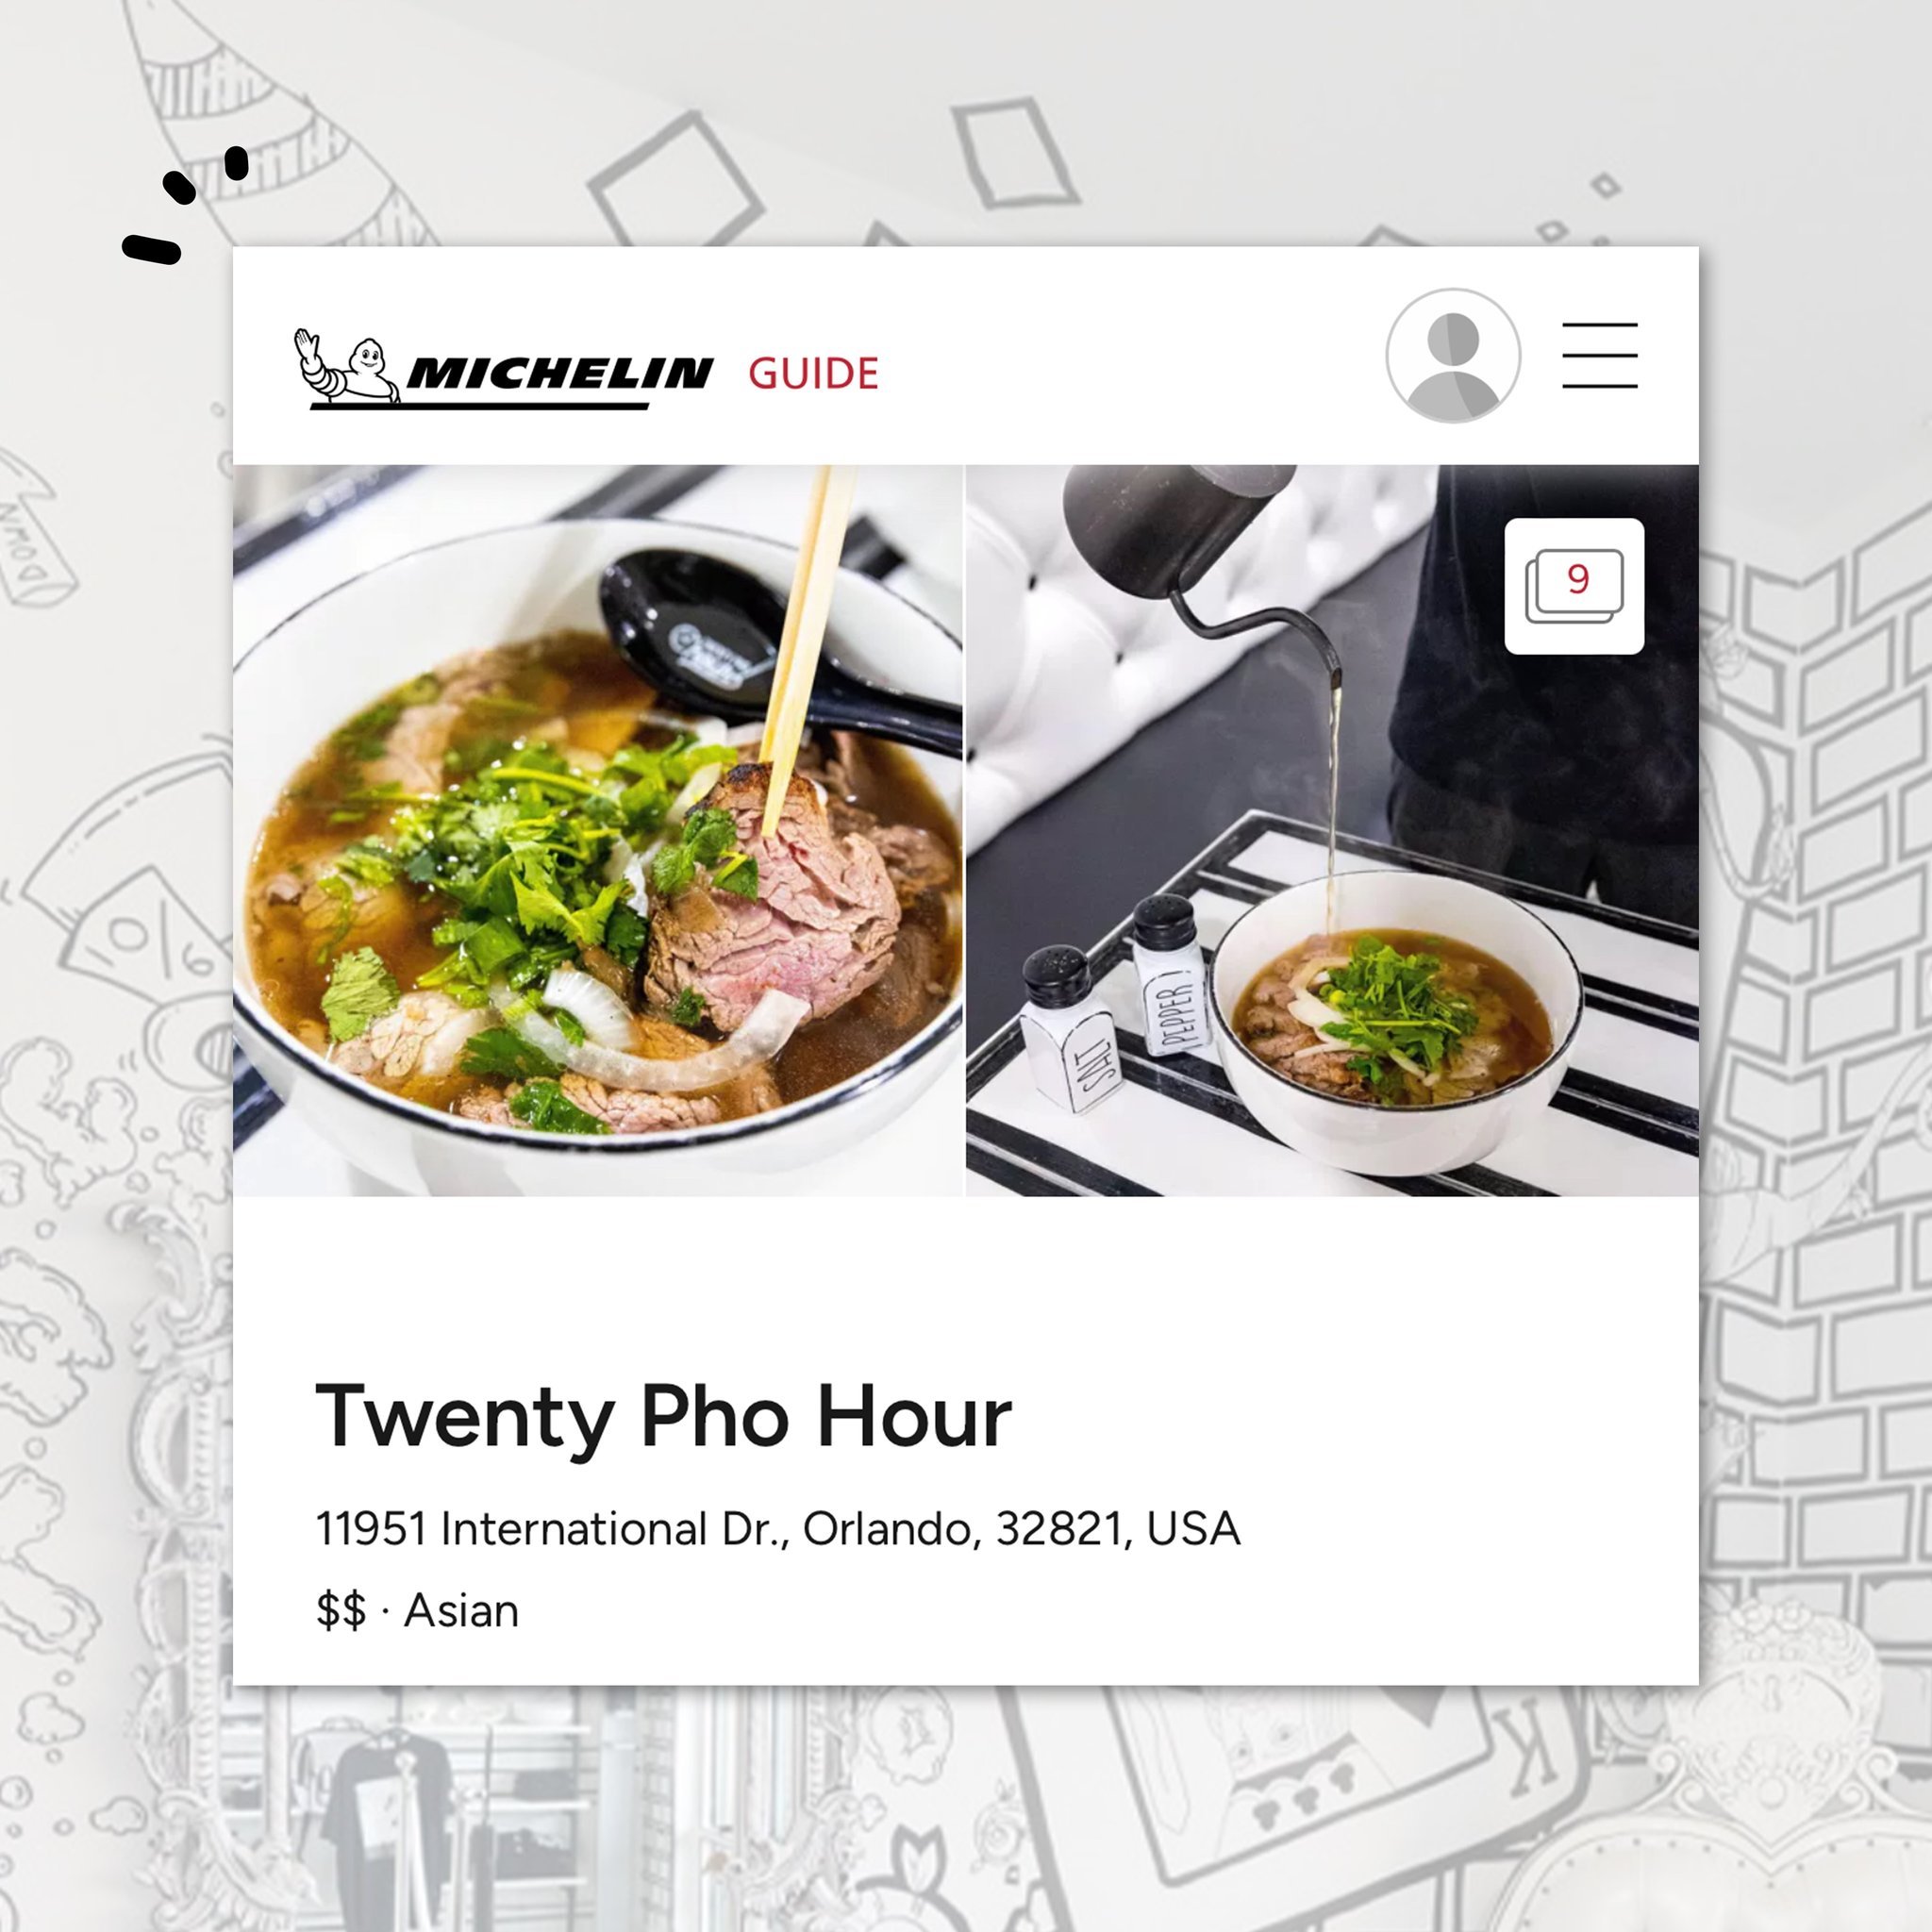 We&rsquo;re glad to be part of the 2024 Michelin Guide, as our second year!🙏
.
You probably hear all the time about how restaurants &ldquo;strive to deliver the highest quality&rdquo;, but we&rsquo;re proud to say that we actually do! We genuinely t